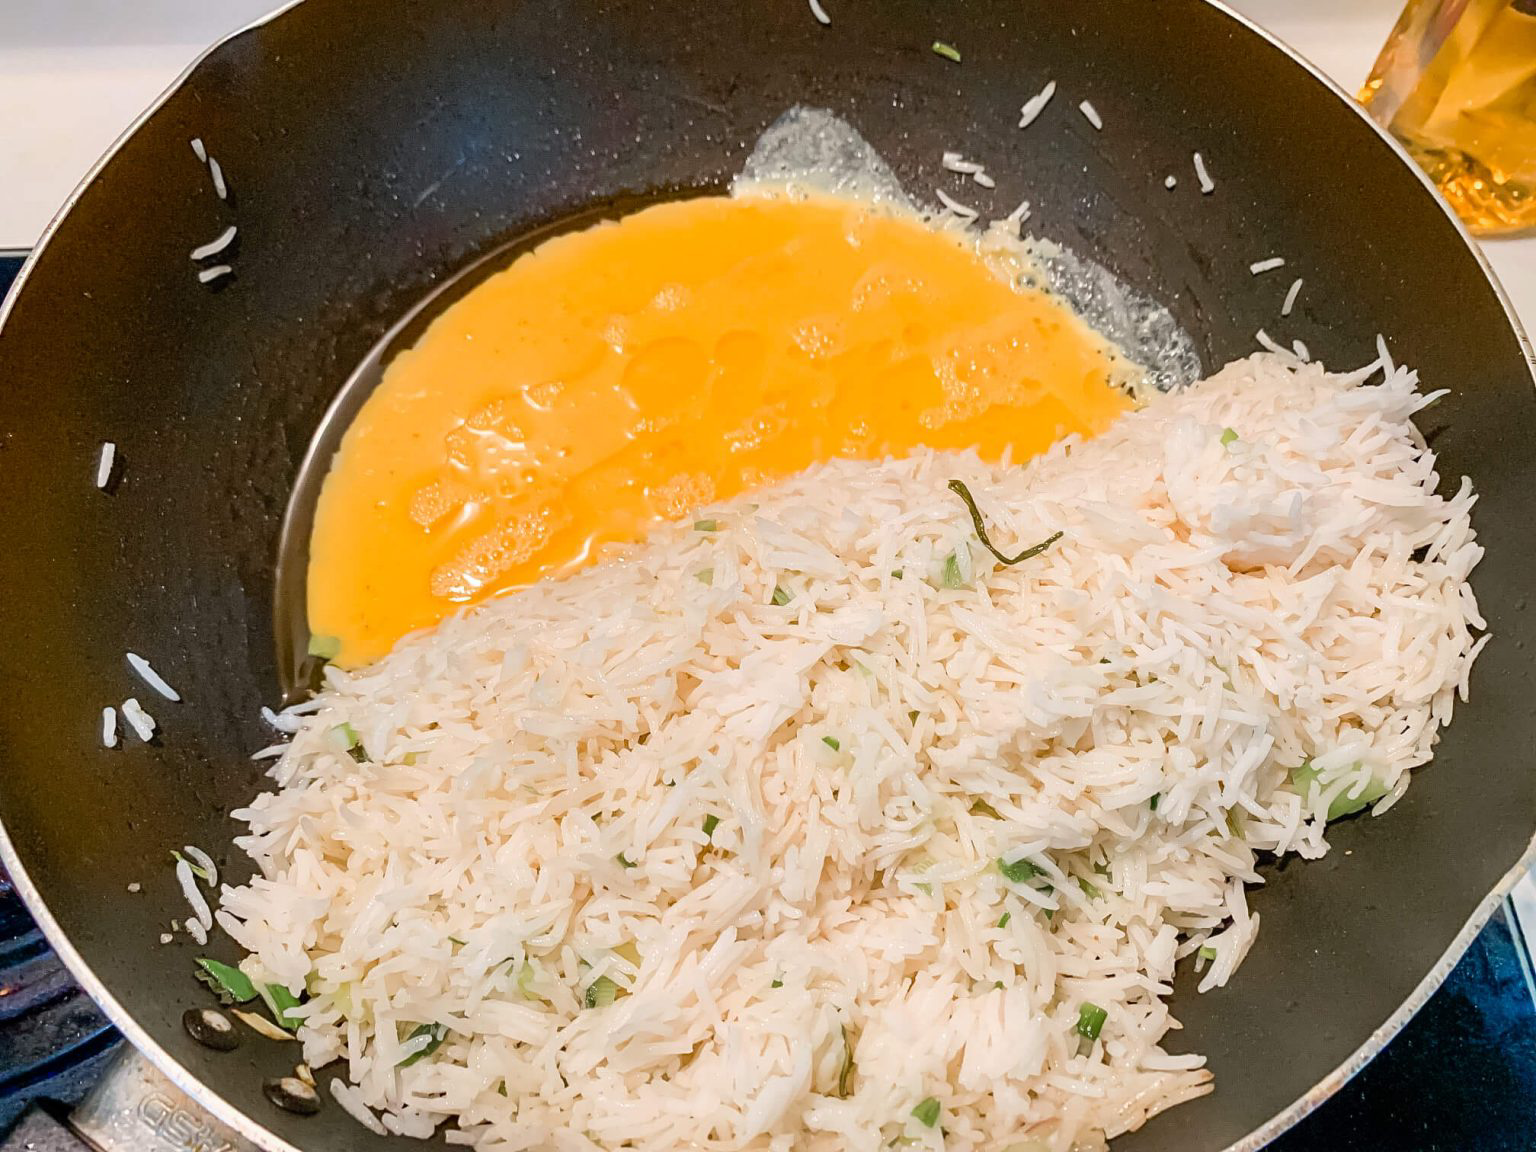 Egg, white rice and green onions frying in a wok.